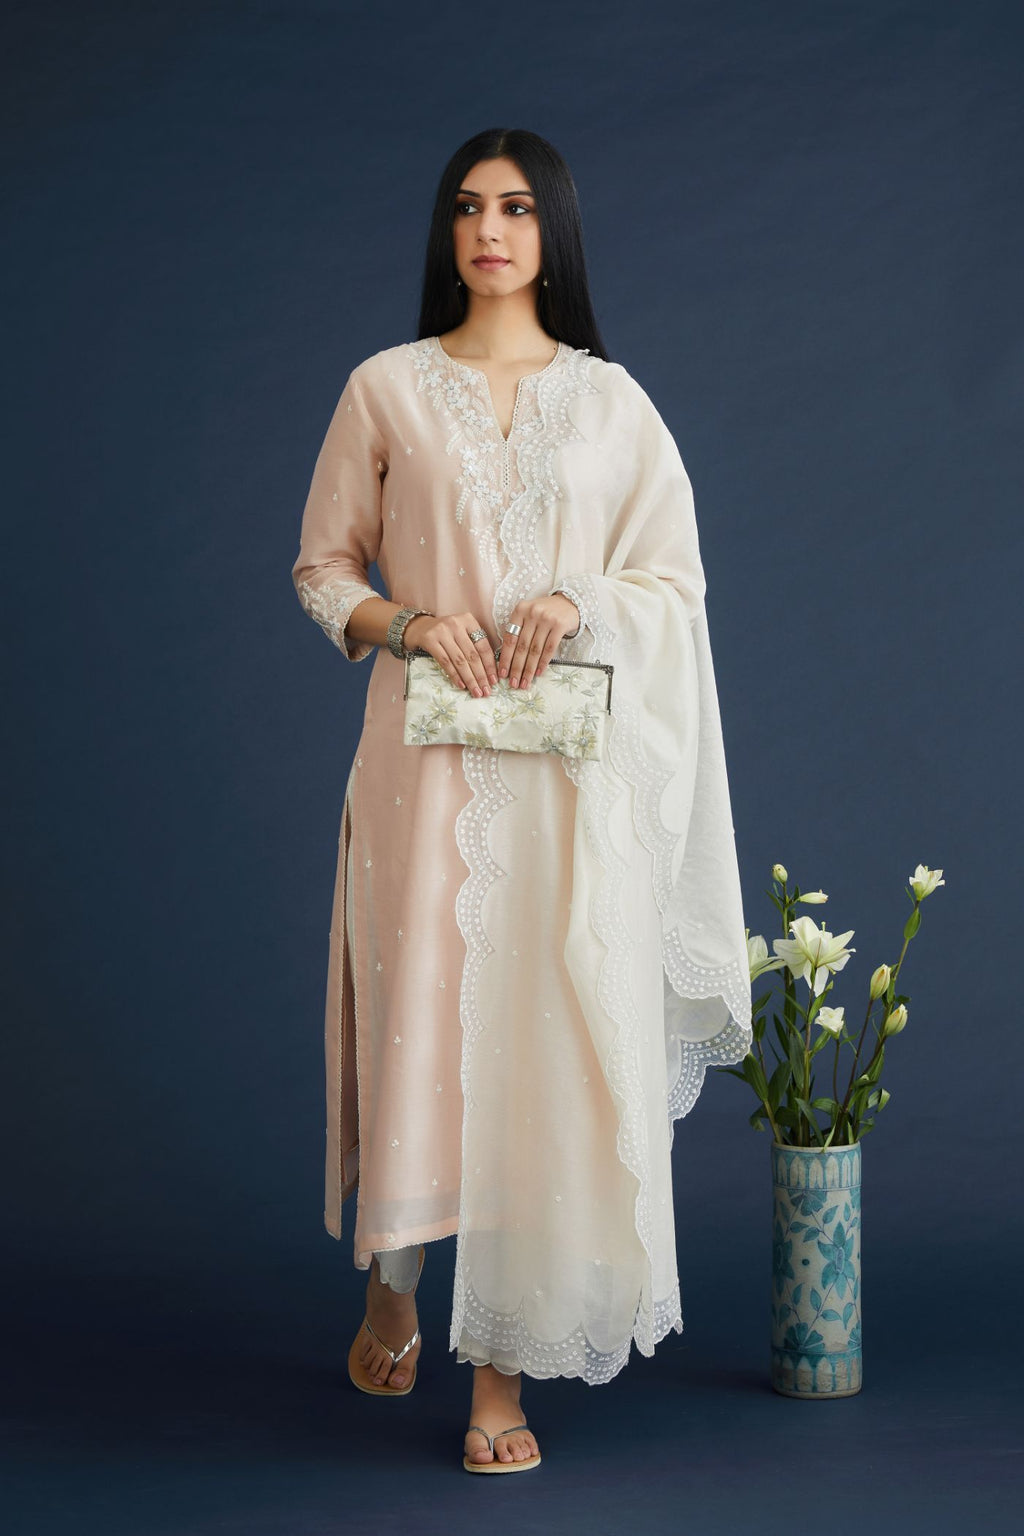 Silk chanderi straight kurta set with all-over silk thread embroidery, highlighted with beads and sequin hand work